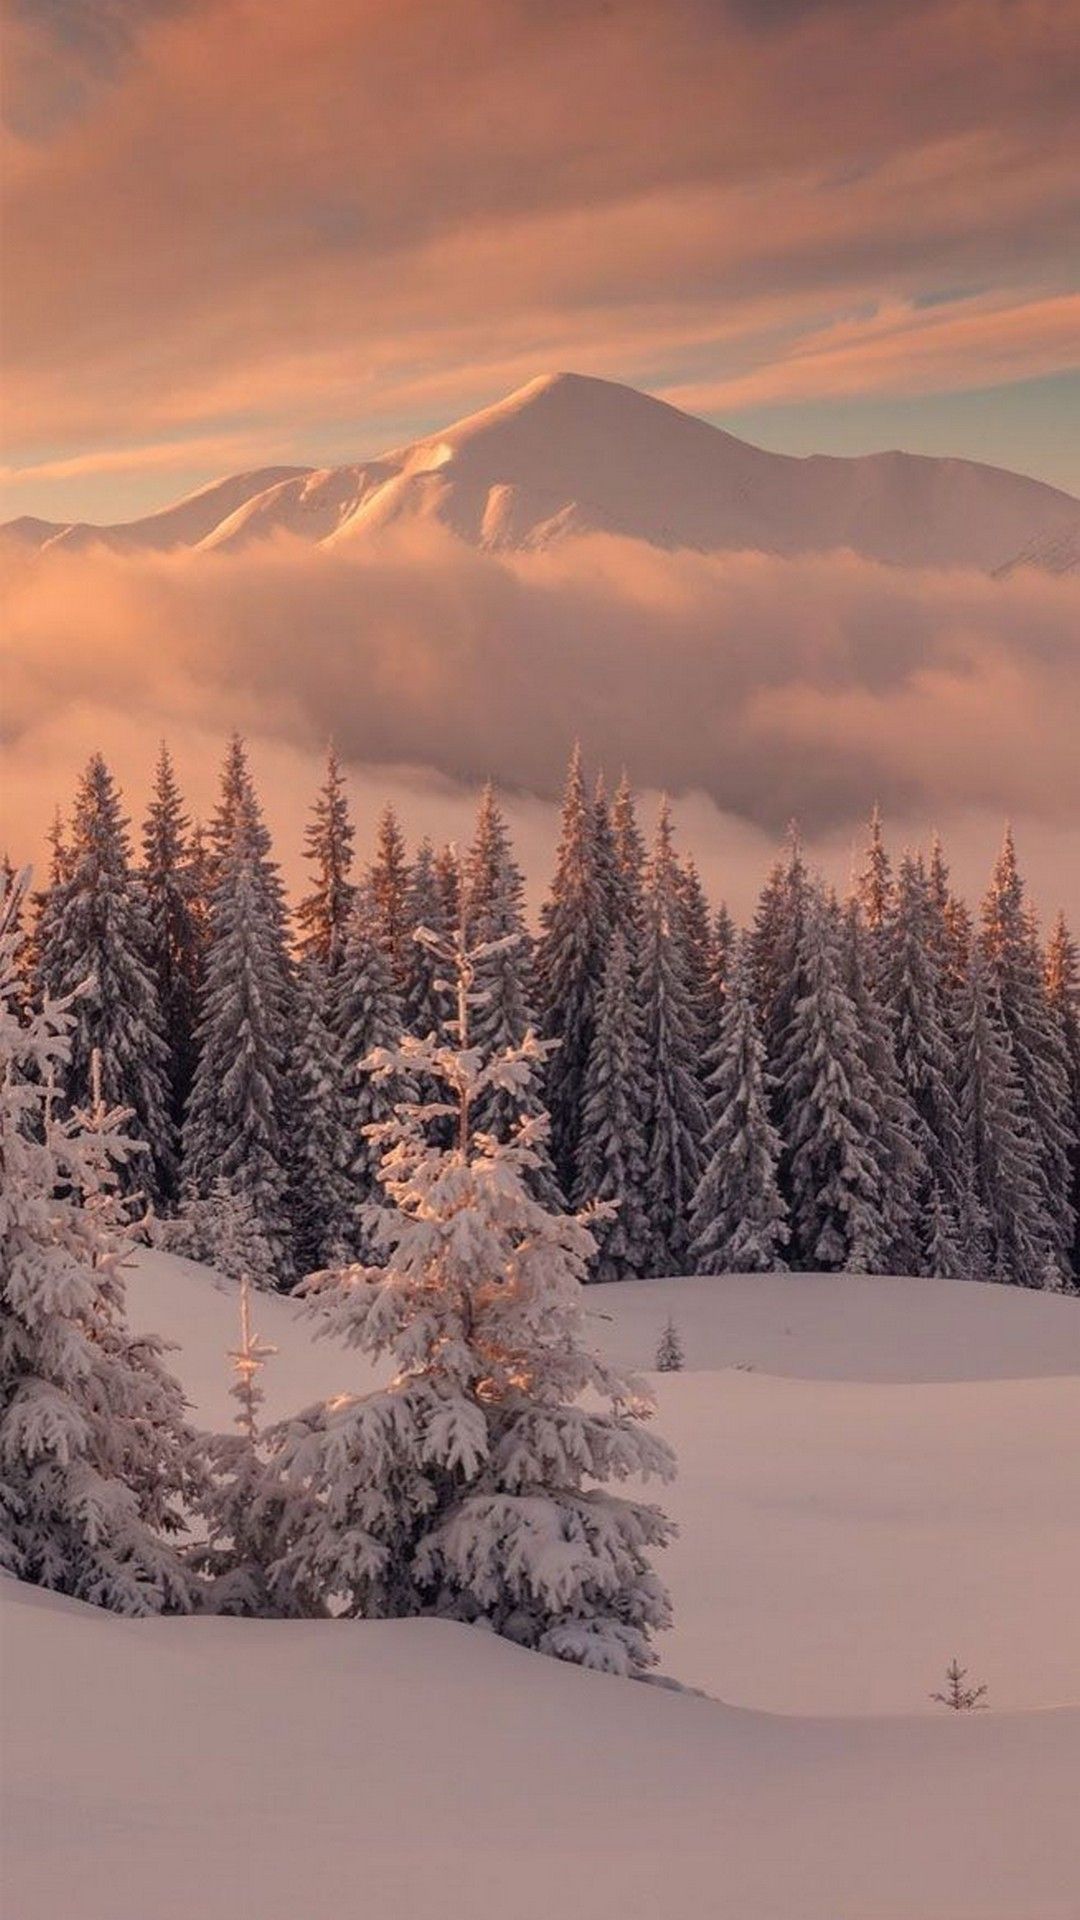 A snow covered mountain with trees - Winter, snow